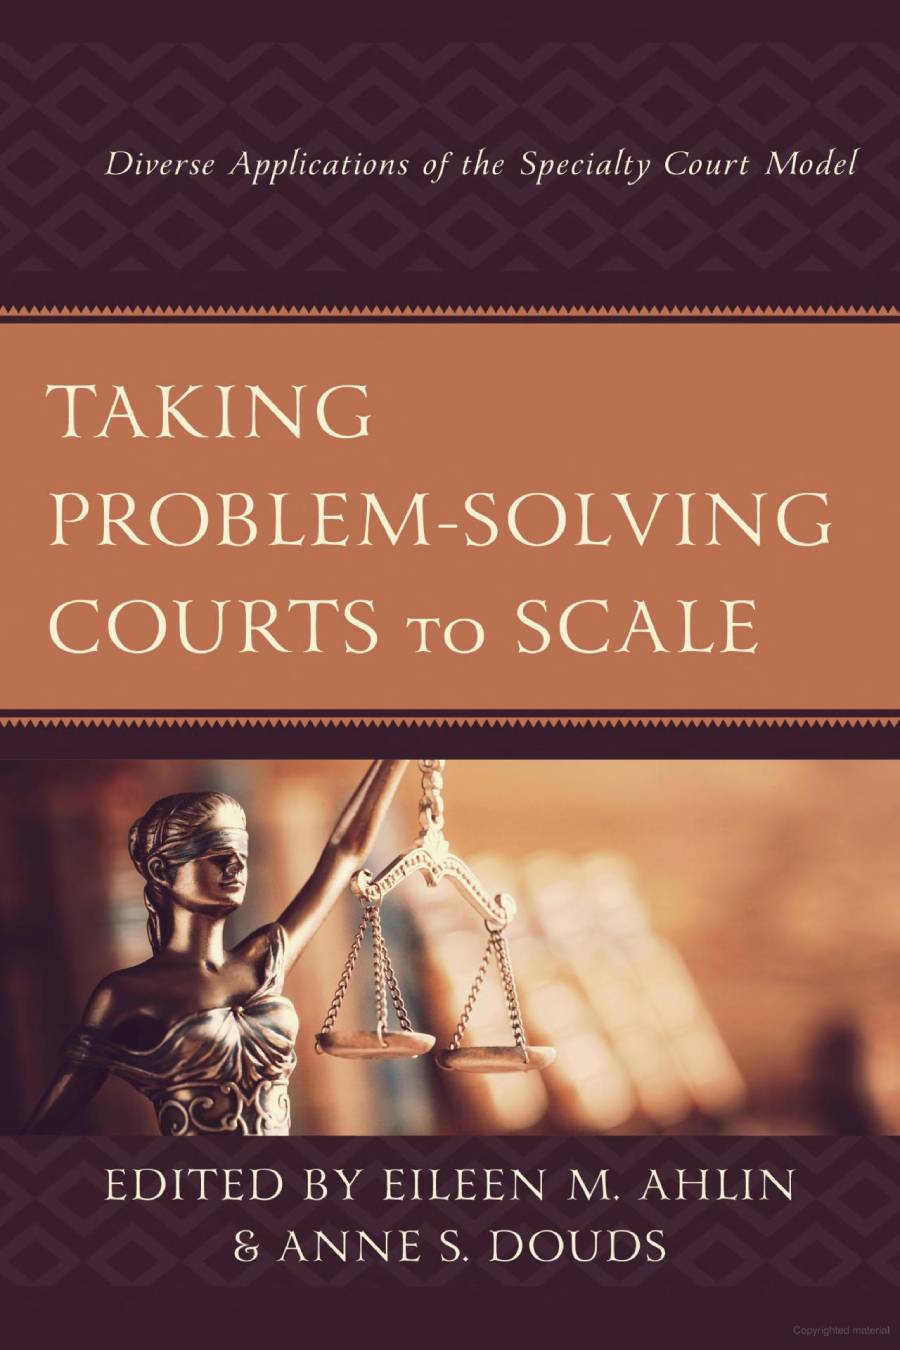 Cover of the book To scale up the problem-solving courts